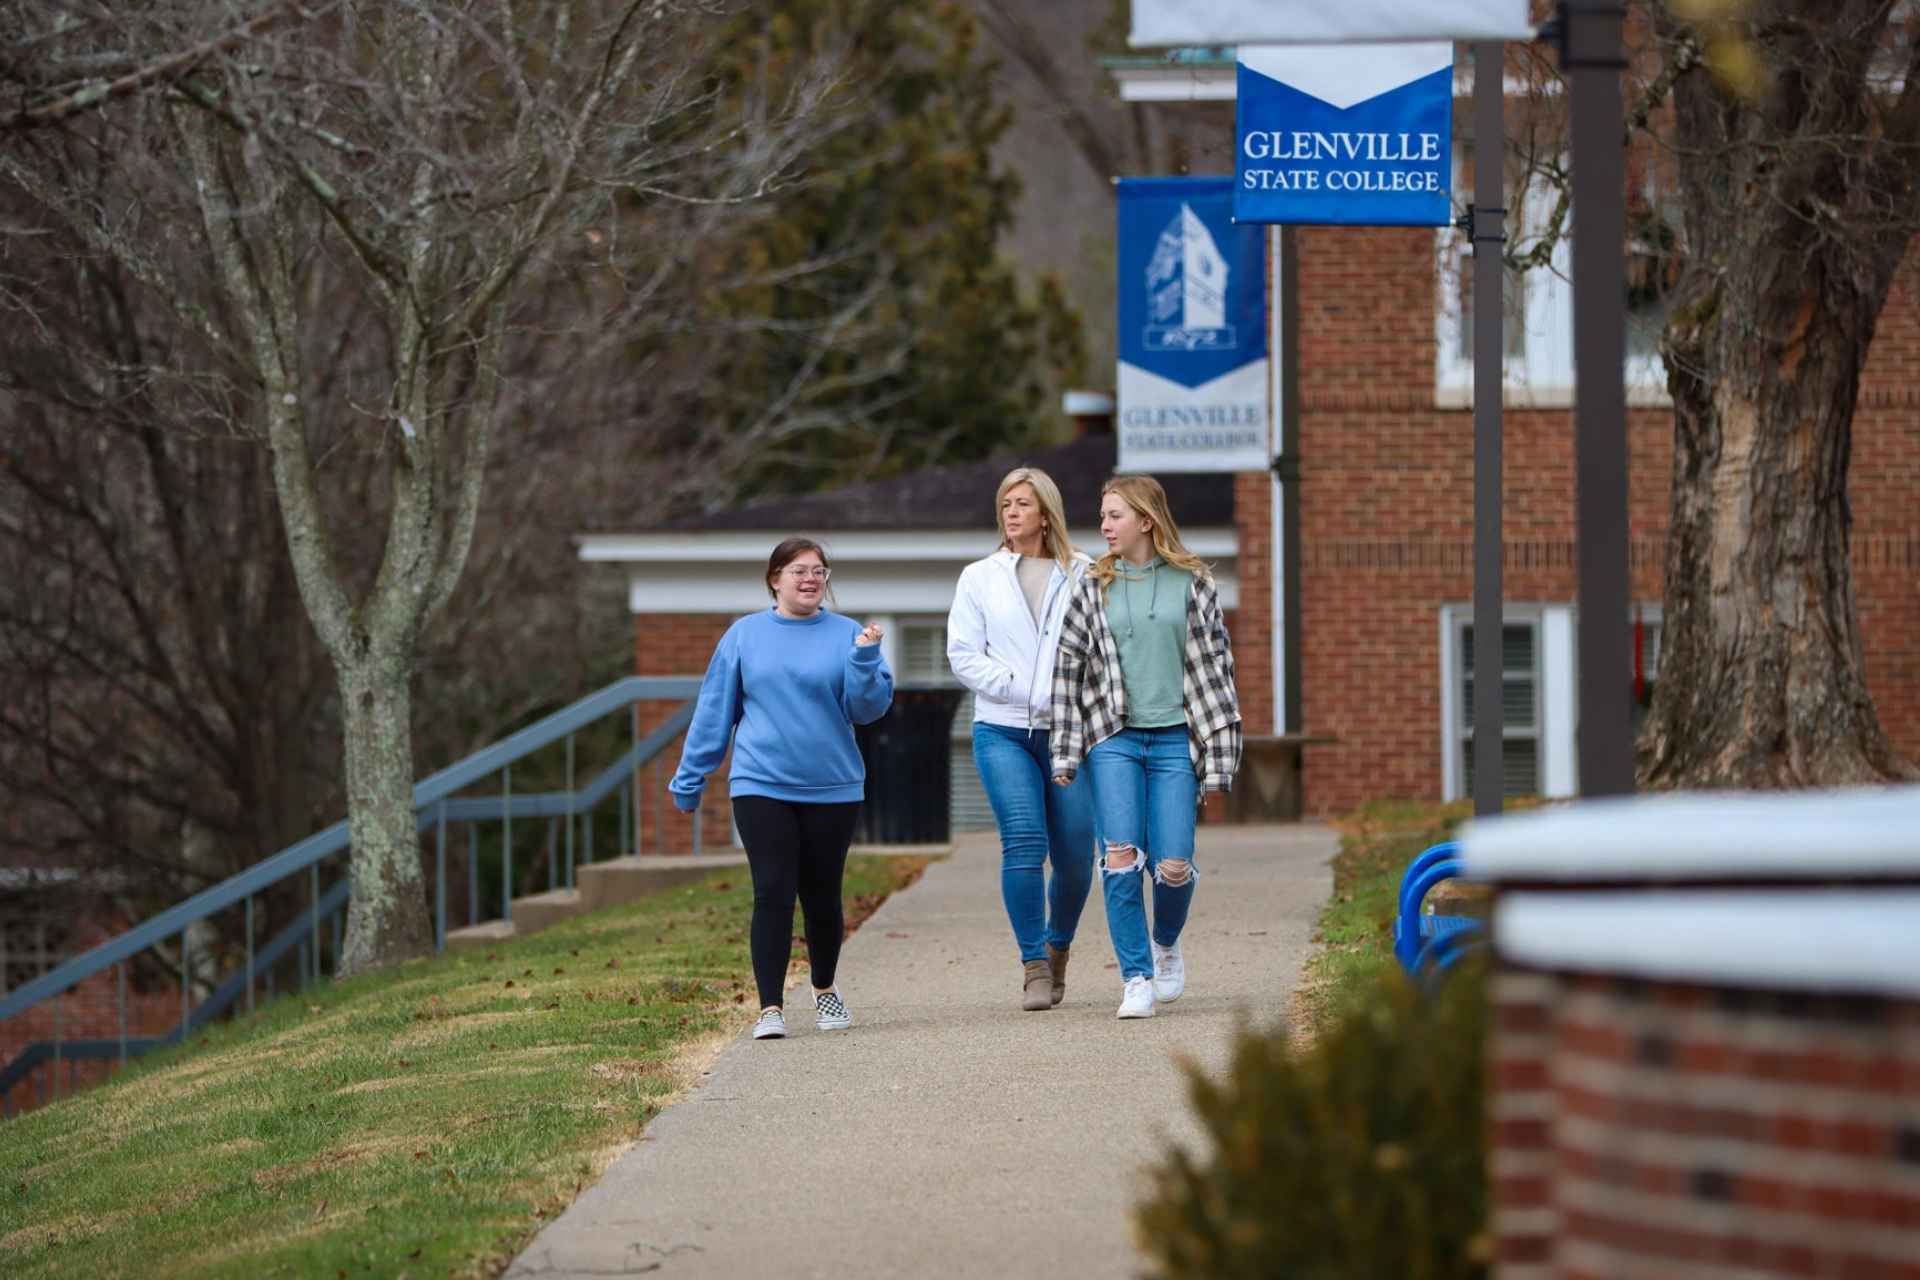 A student tour guide shows a prospective student around the Glenville State College campus. The College is hosting a special Winter Open House on Saturday, February 19 as part of Glenville State’s 150th anniversary.